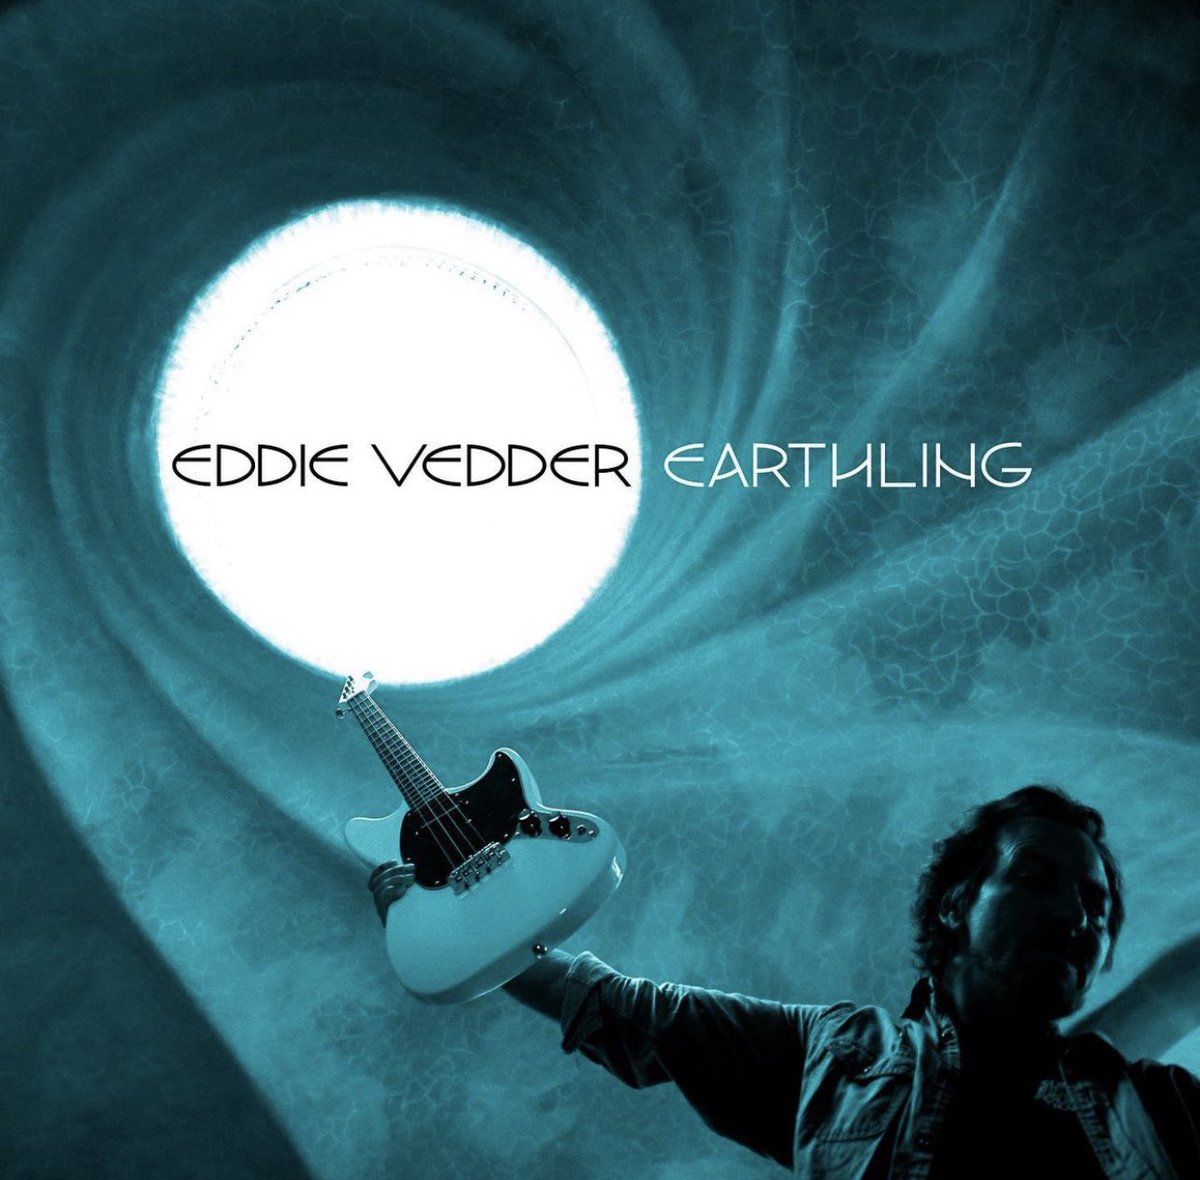 EARTHLING by @eddievedder is out now… there are no words to properly describe how beautiful the experience of making this album has been…and if it couldn’t get better I am writing this from my hotel room while on tour getting to play it all LIVE!!!